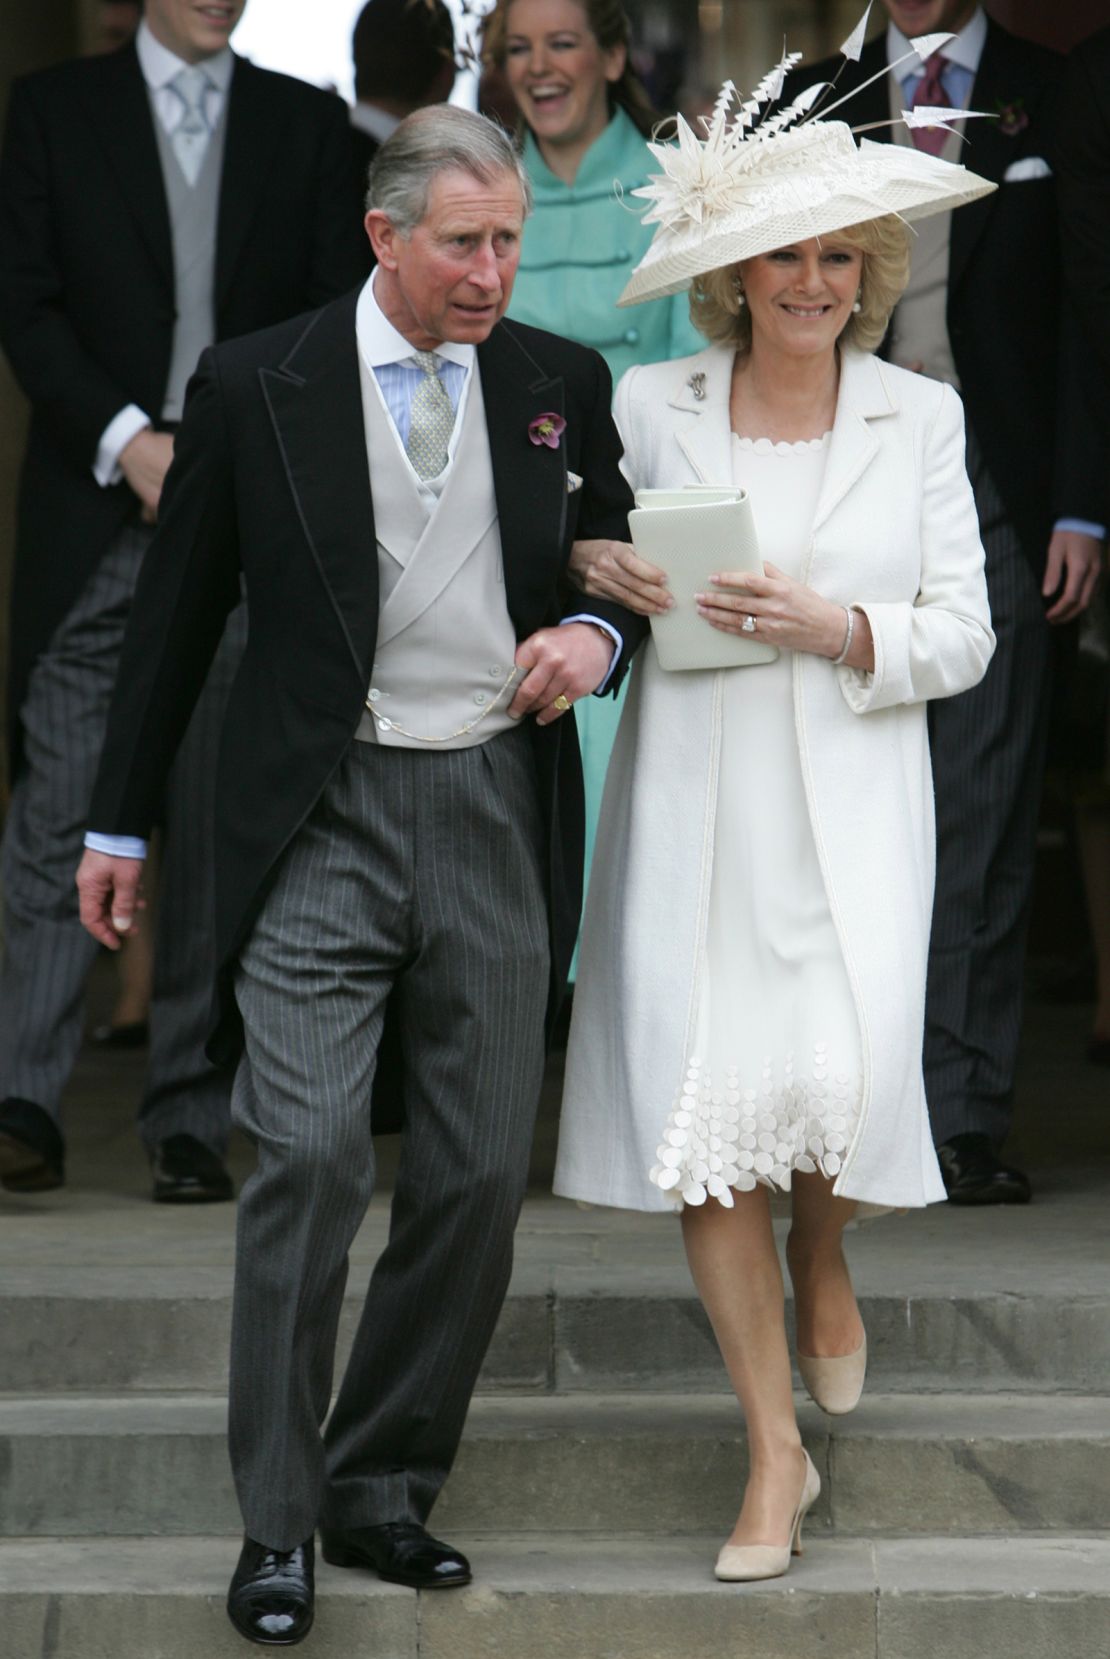 At her wedding to Charles in 2005, Camilla wore two outfits. The first was a white silk coat and chiffon dress by Robinson Valentine finished with a feather and lace trimmed hat by Philip Treacy.